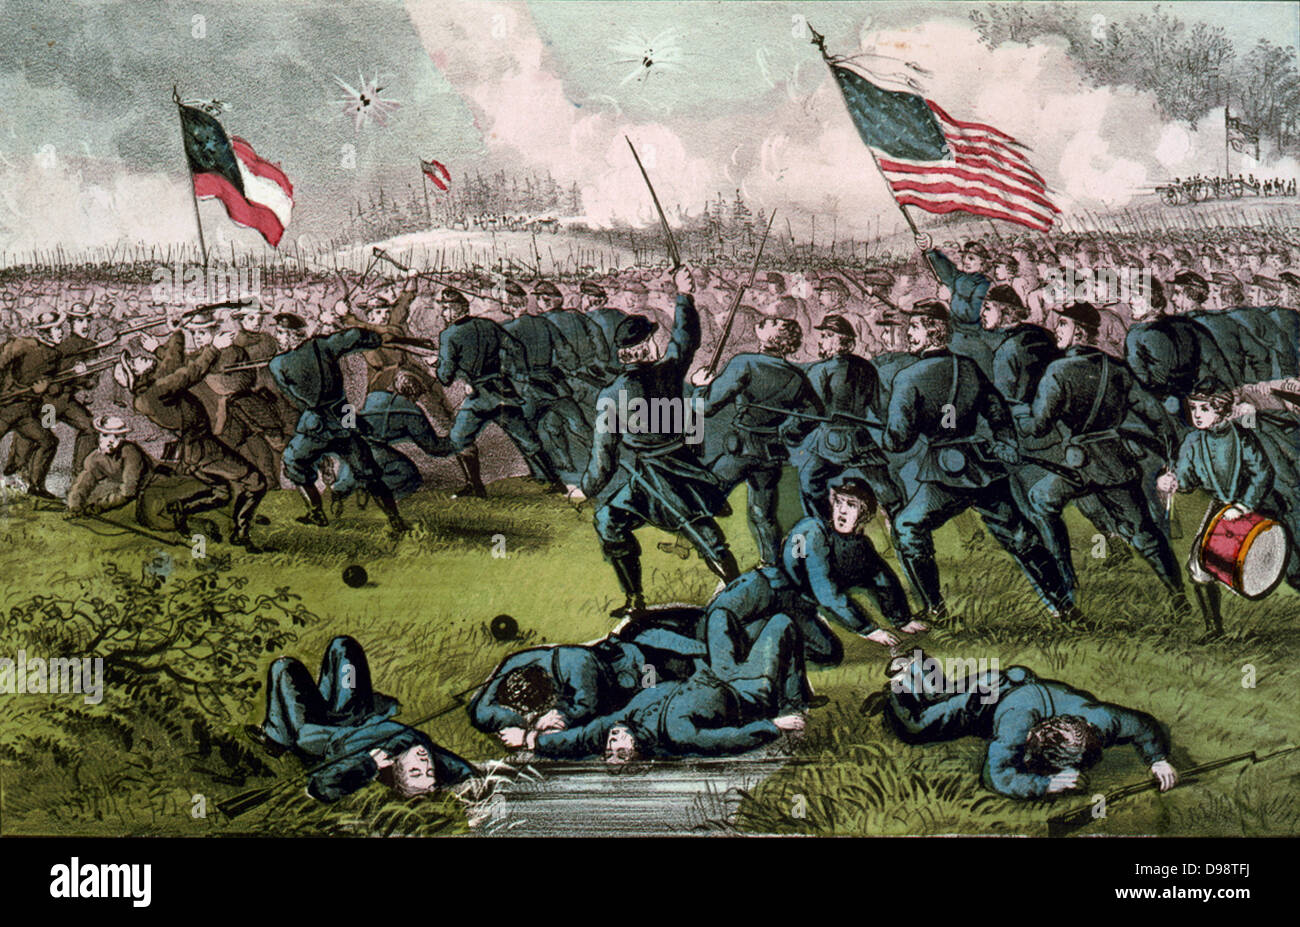 American Civil War 1861-1865: Second Battle of Corinth, Mississippi, 3-4 October 1862. Confrontation of Union and Confederate infantry, bayonets drawn. Union victory. Drummer-boy, right, casualties, foreground. Currier & Ives. Stock Photo